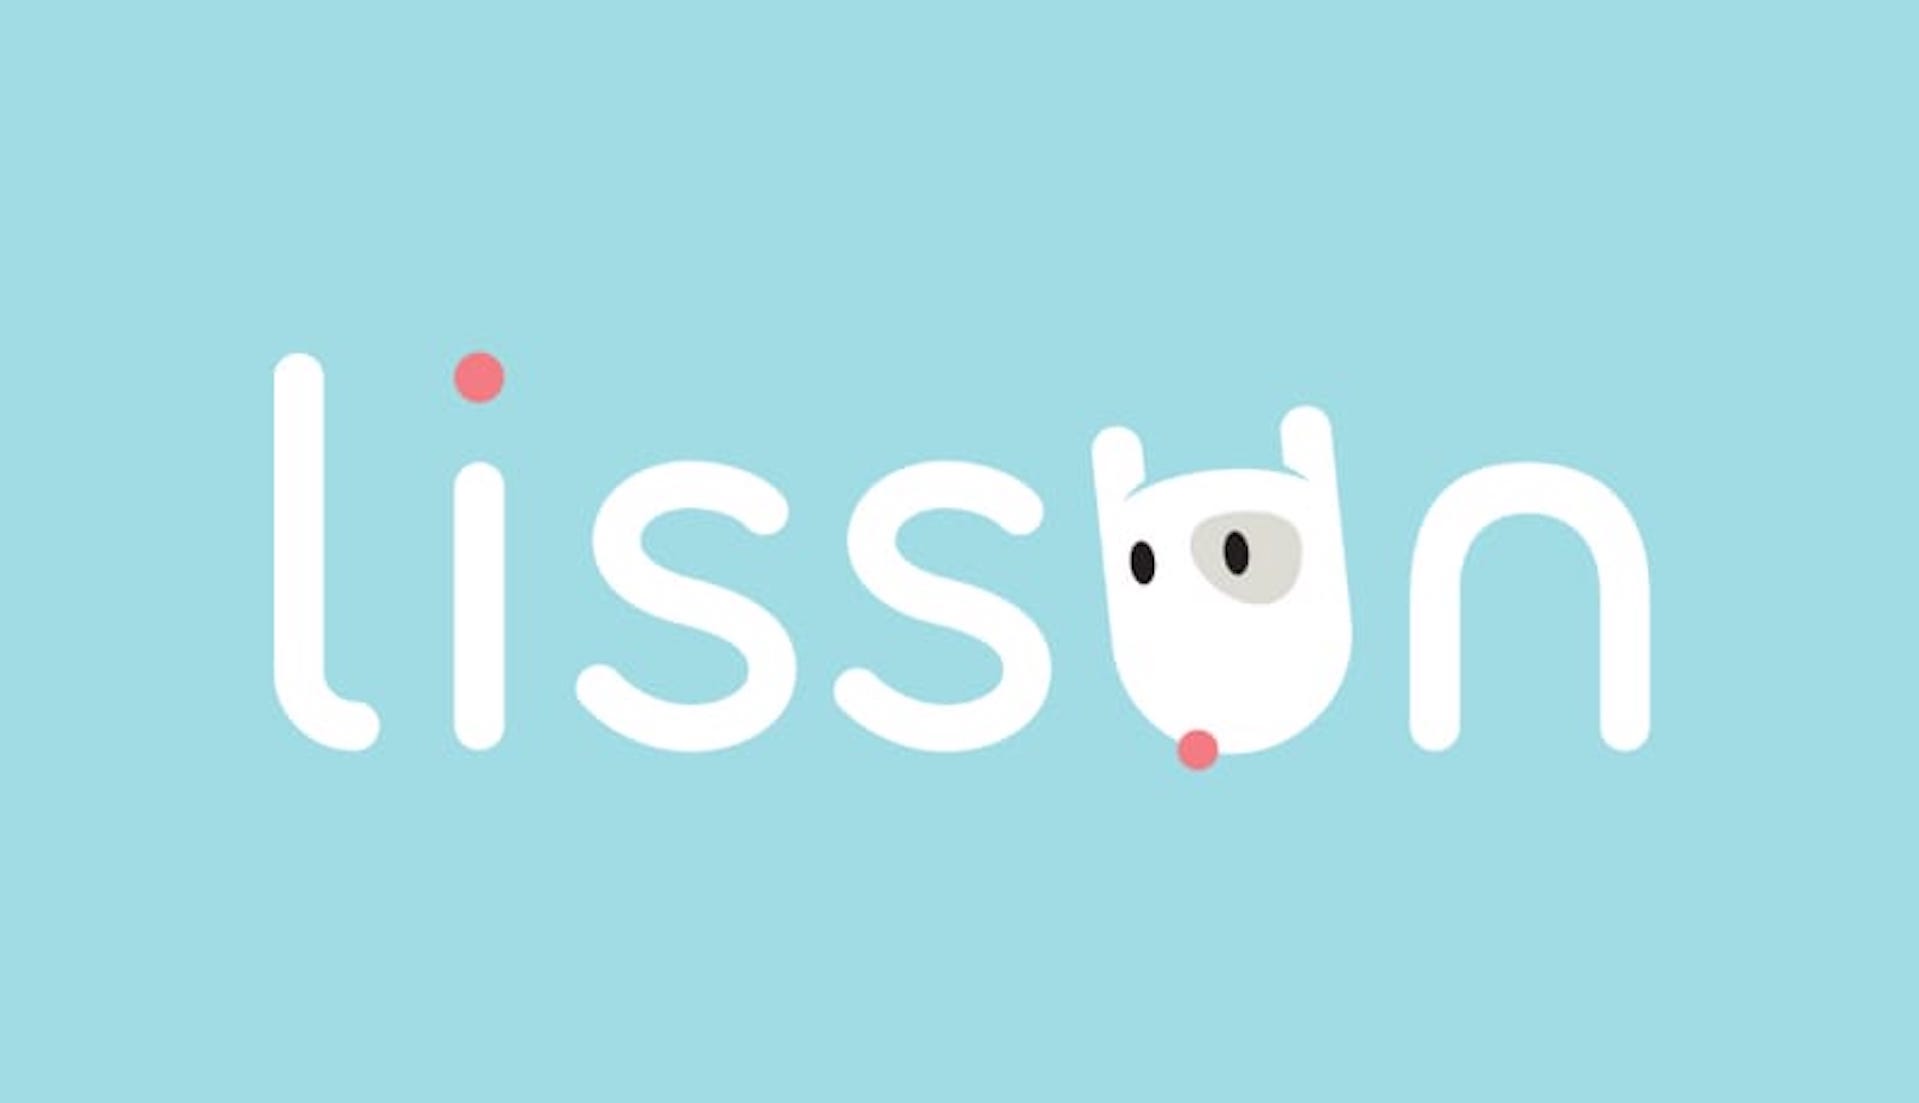 Mental wellness startup LISSUN announces the second edition of its yearly campaign